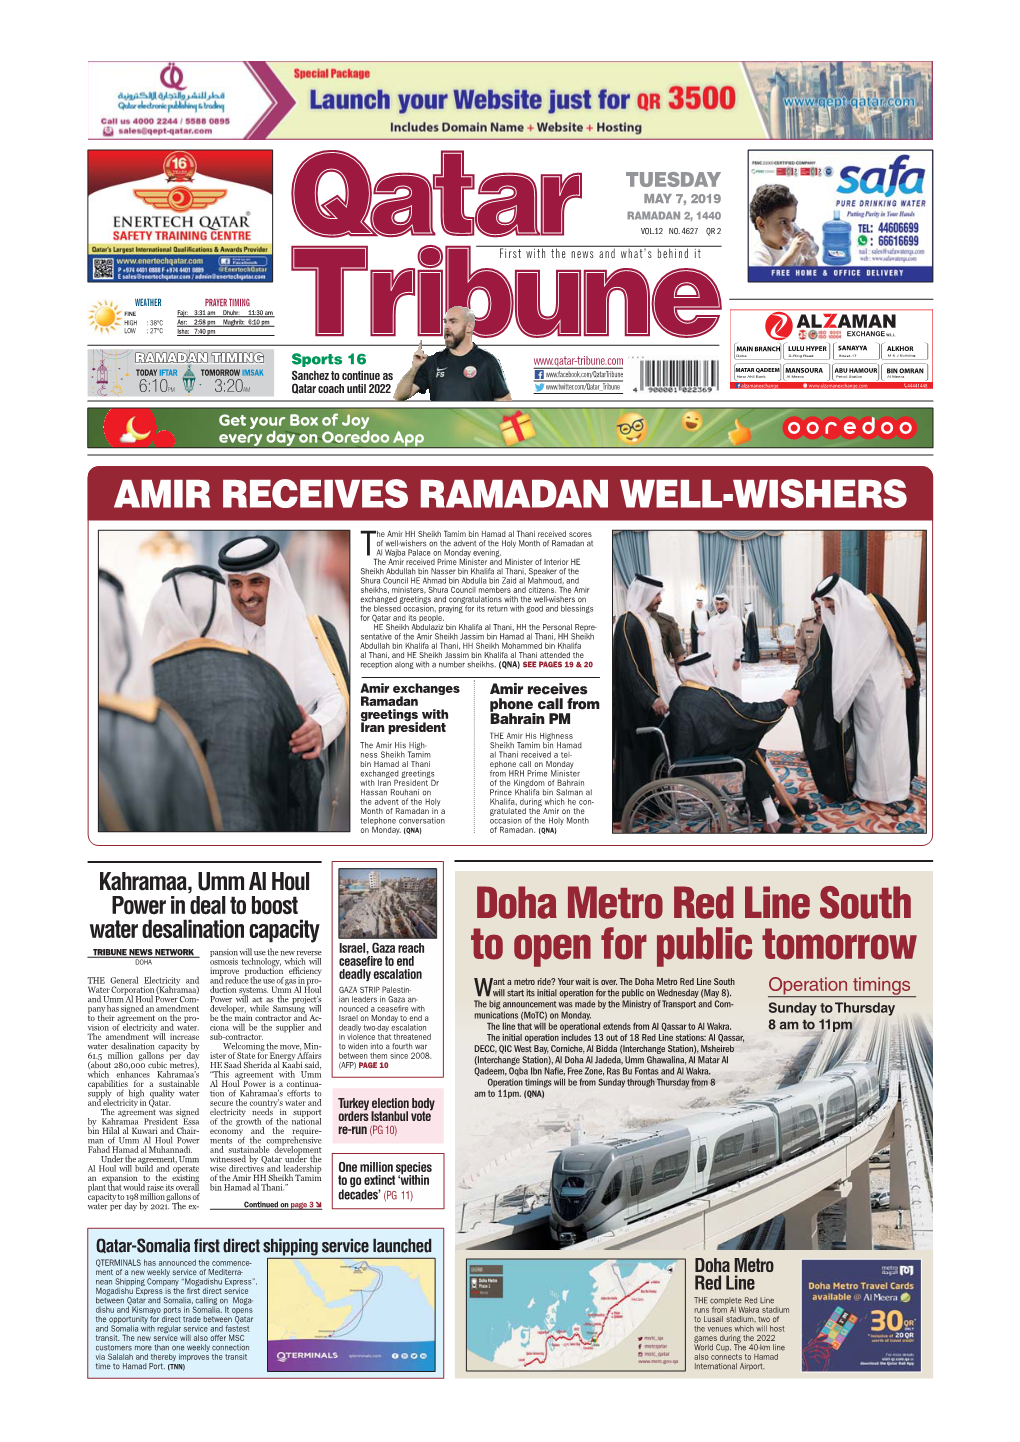 Doha Metro Red Line South to Open for Public Tomorrow